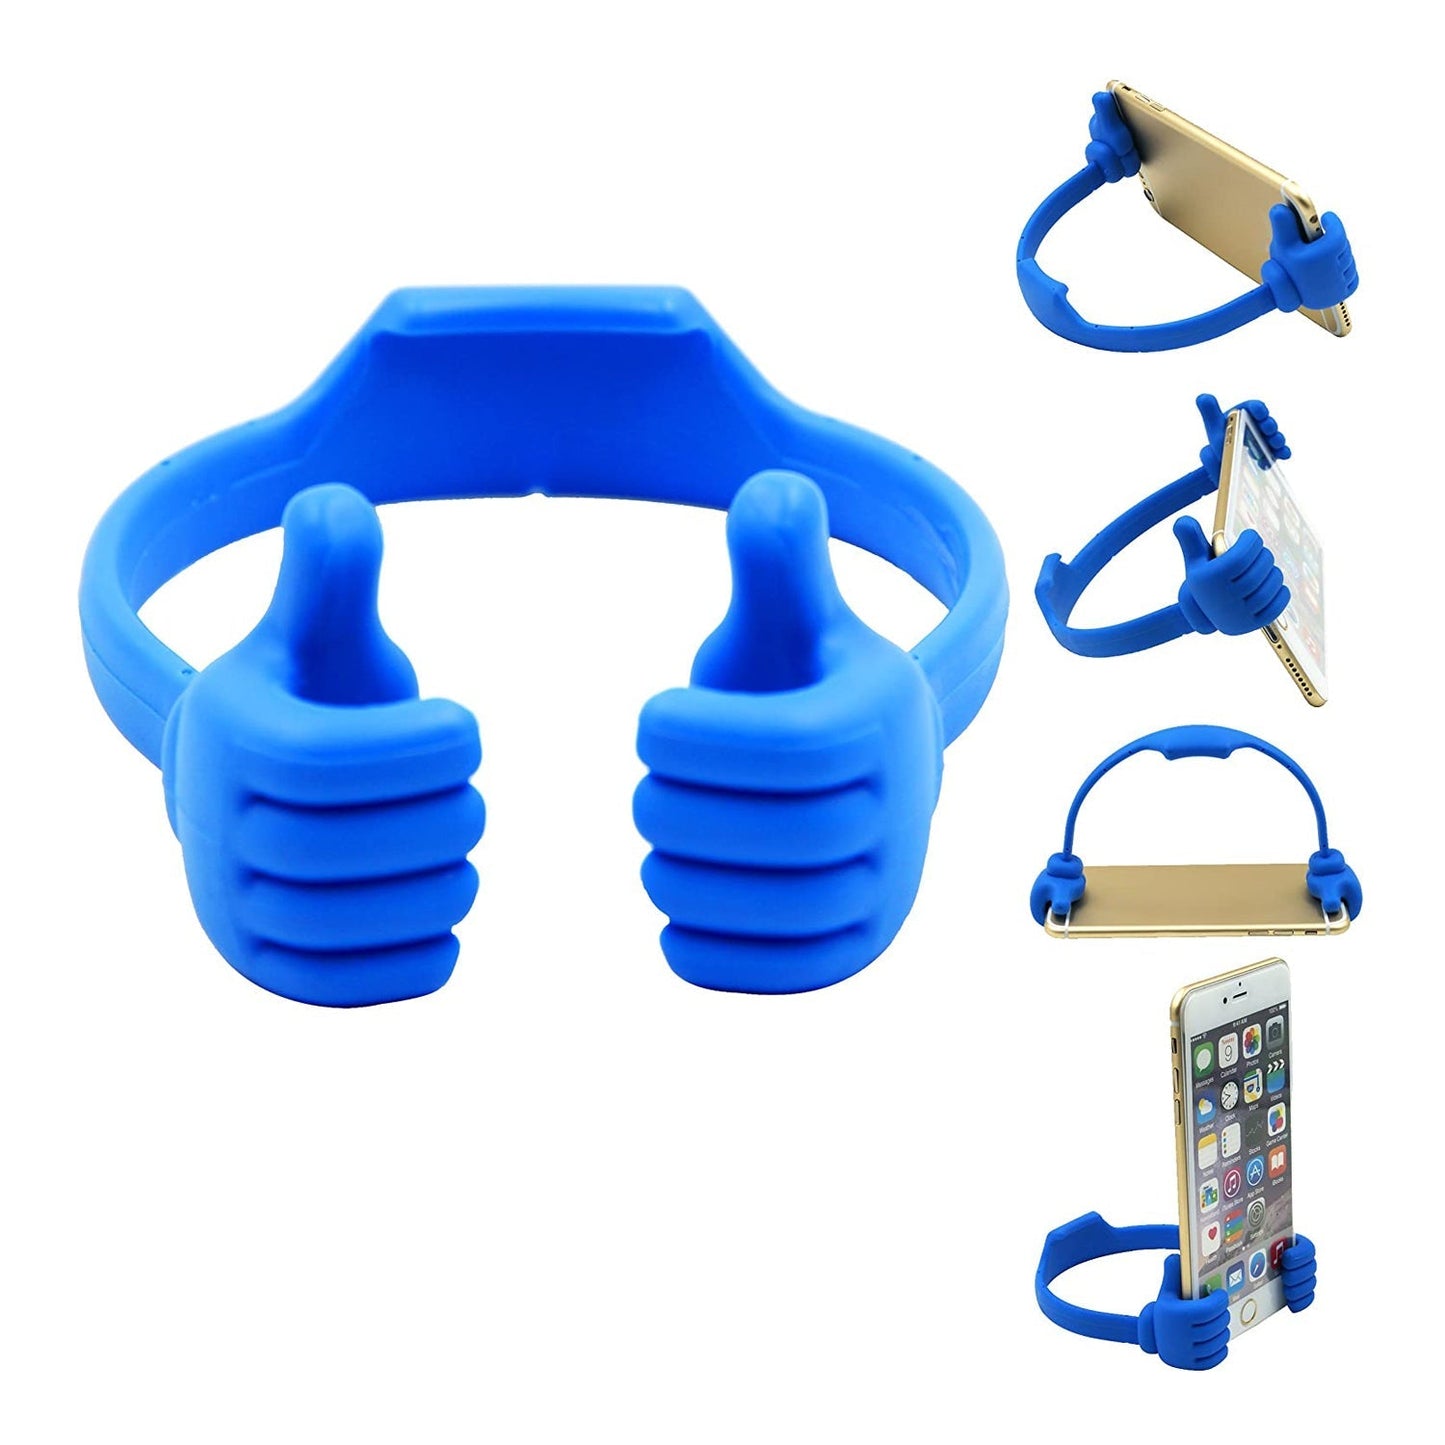 6132 4 Pc Hand Shape Mobile Stand used in all kinds of places including household and offices as a mobile supporting stand.